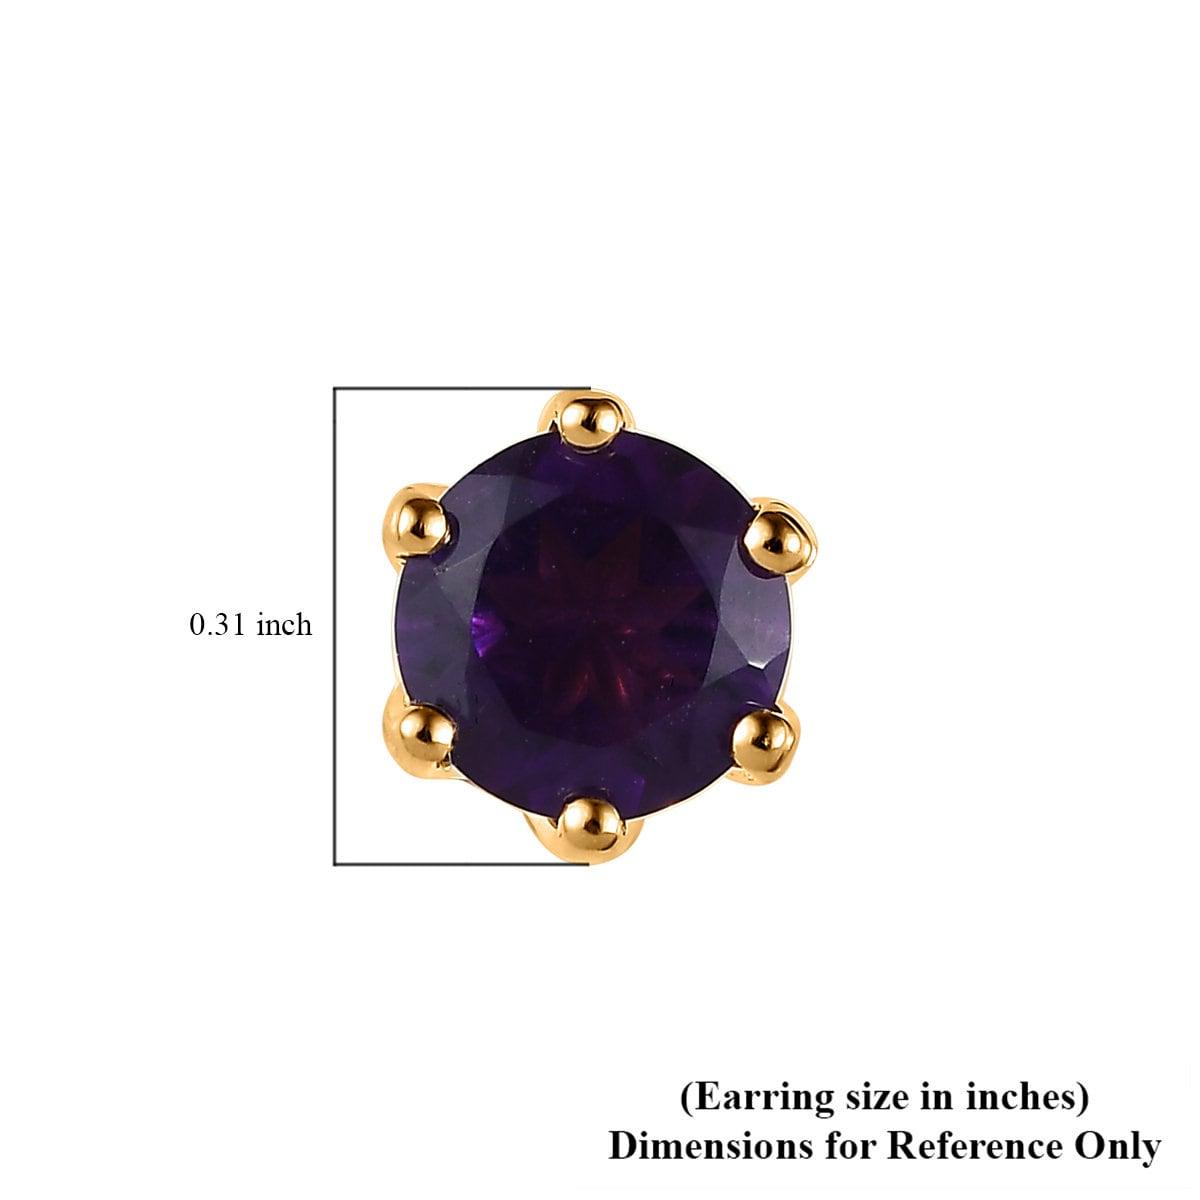 AAA Amethyst Round Studs earrings, 925 Sterling Silver, 6 Prong Stud, 18K Gold Plated, Round Studs by Inspiring Jewellery - Inspiring Jewellery